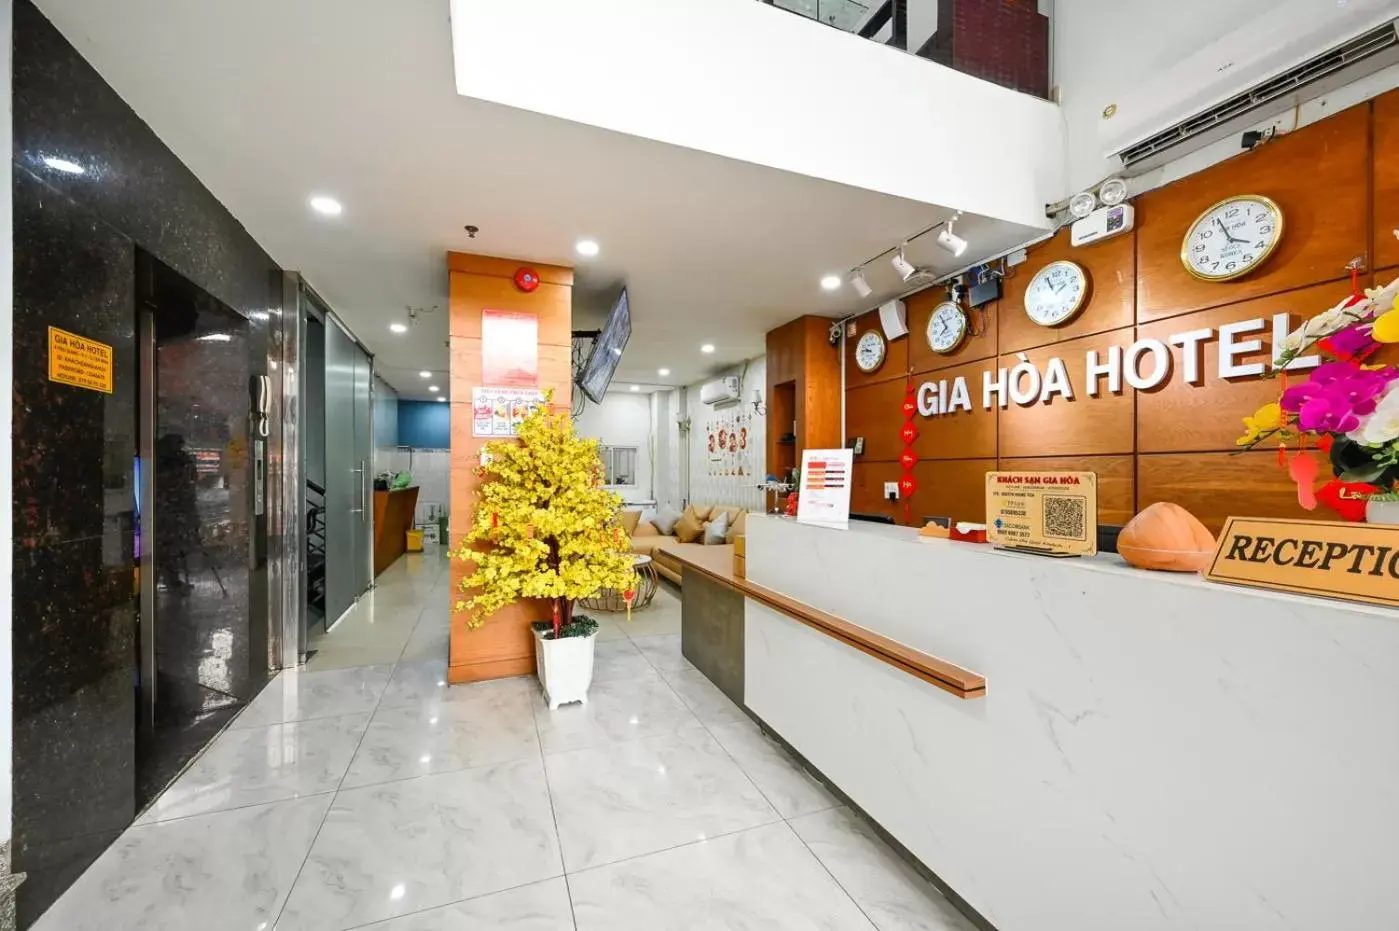 Property logo or sign, Lobby/Reception in Gia Hoa Airport Hotel